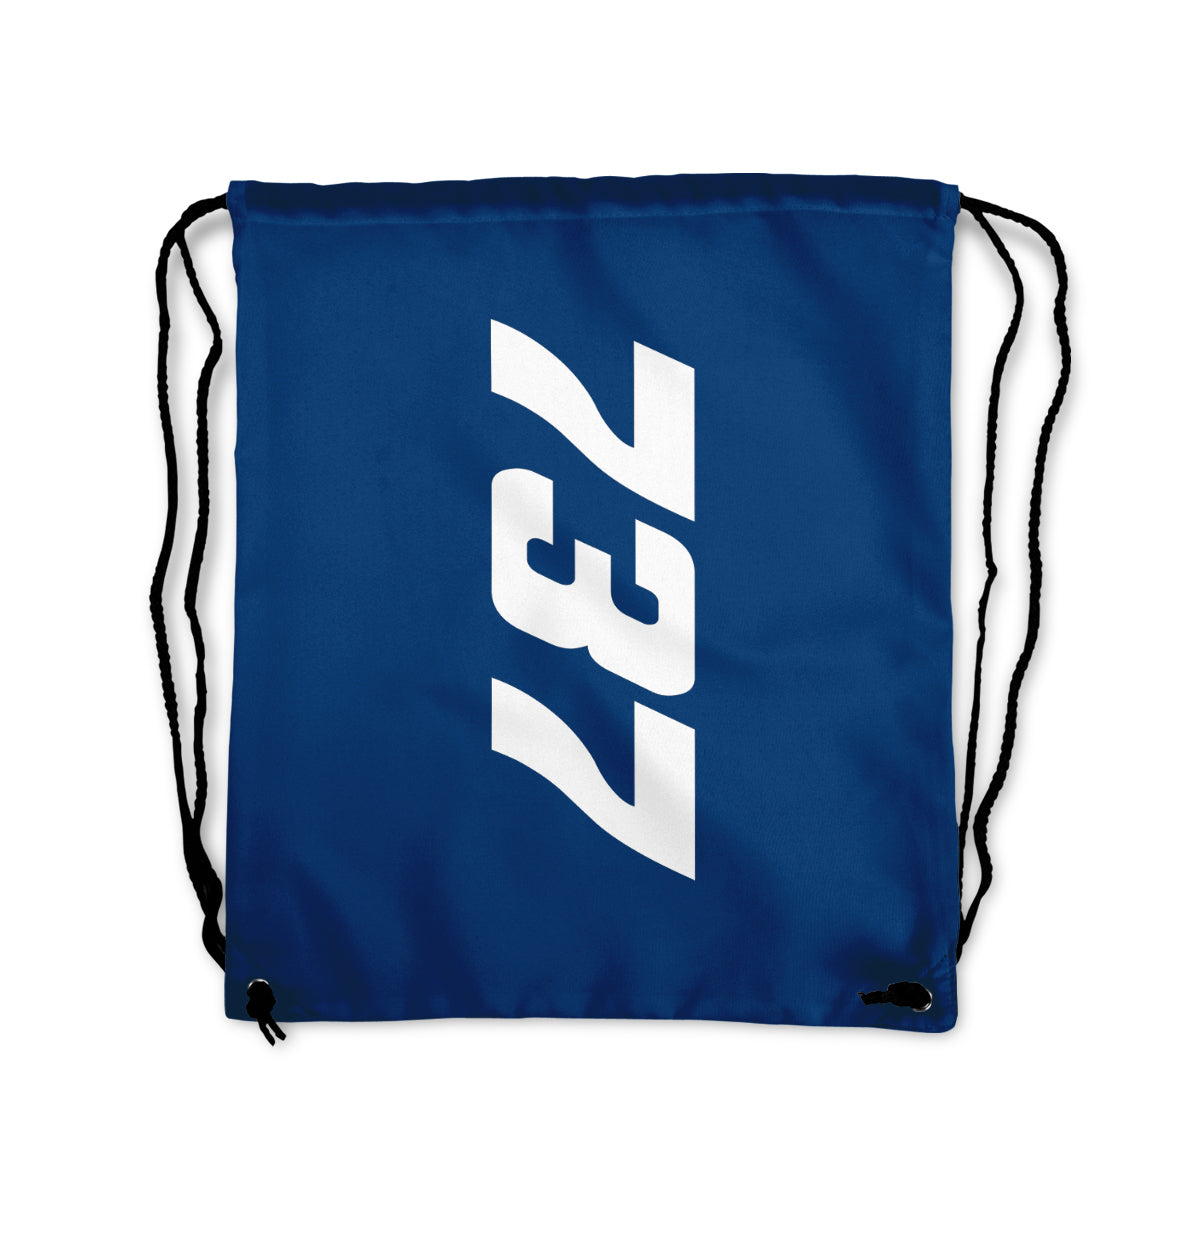 Boeing 737 Text Designed Drawstring Bags